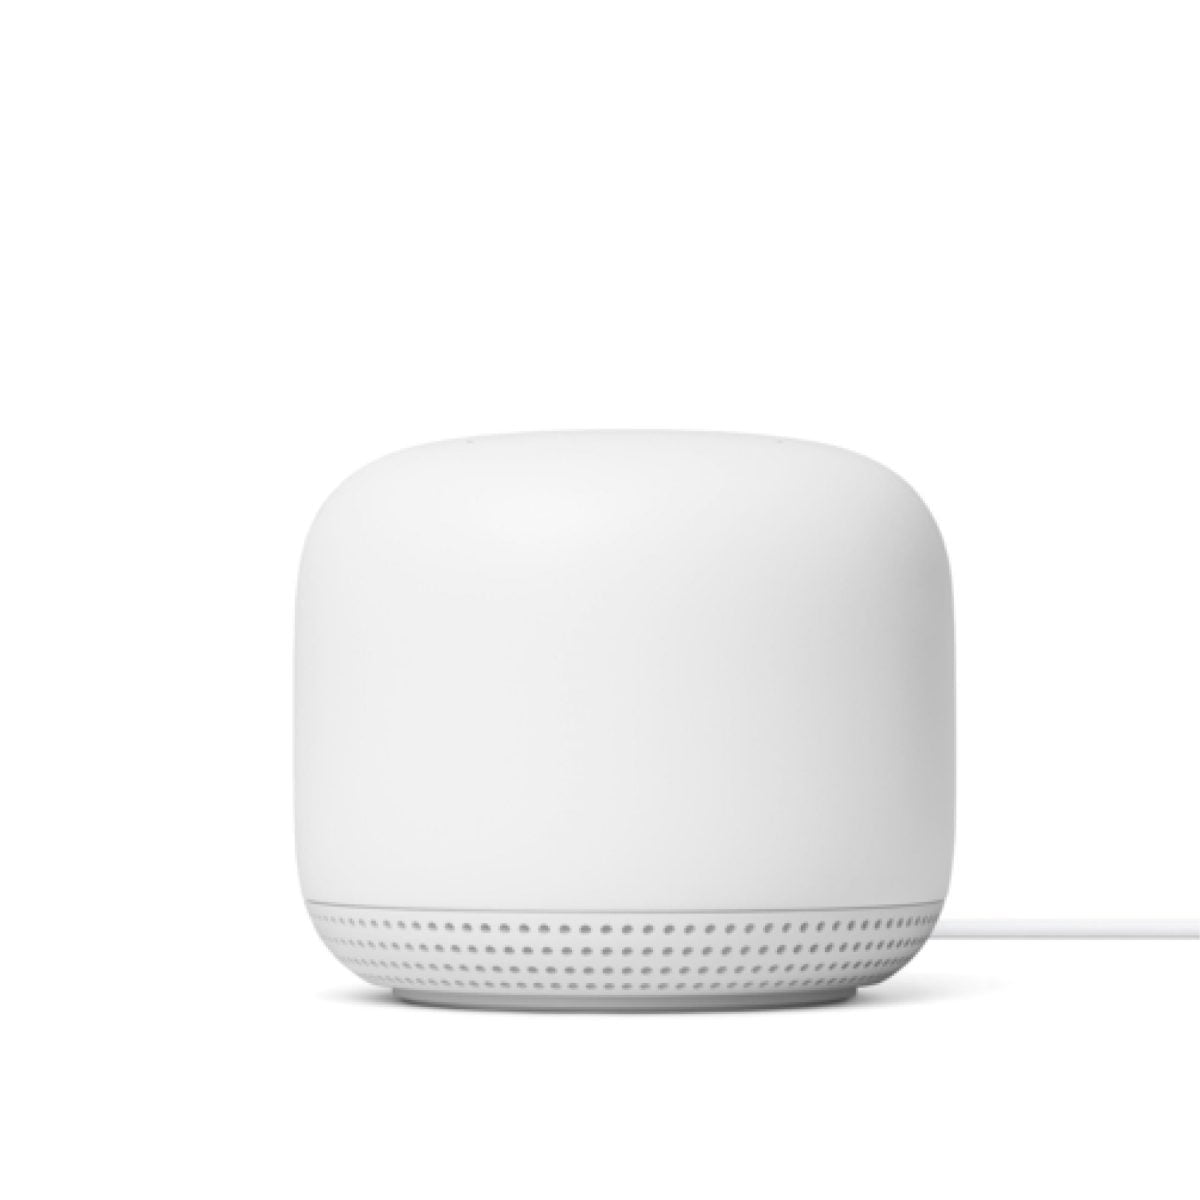 Dsd2212 02 Scaled Google Https://Youtu.be/Wsduj9Sm78K Google Google Nest Wifi Router And 2 Access Points (2020)